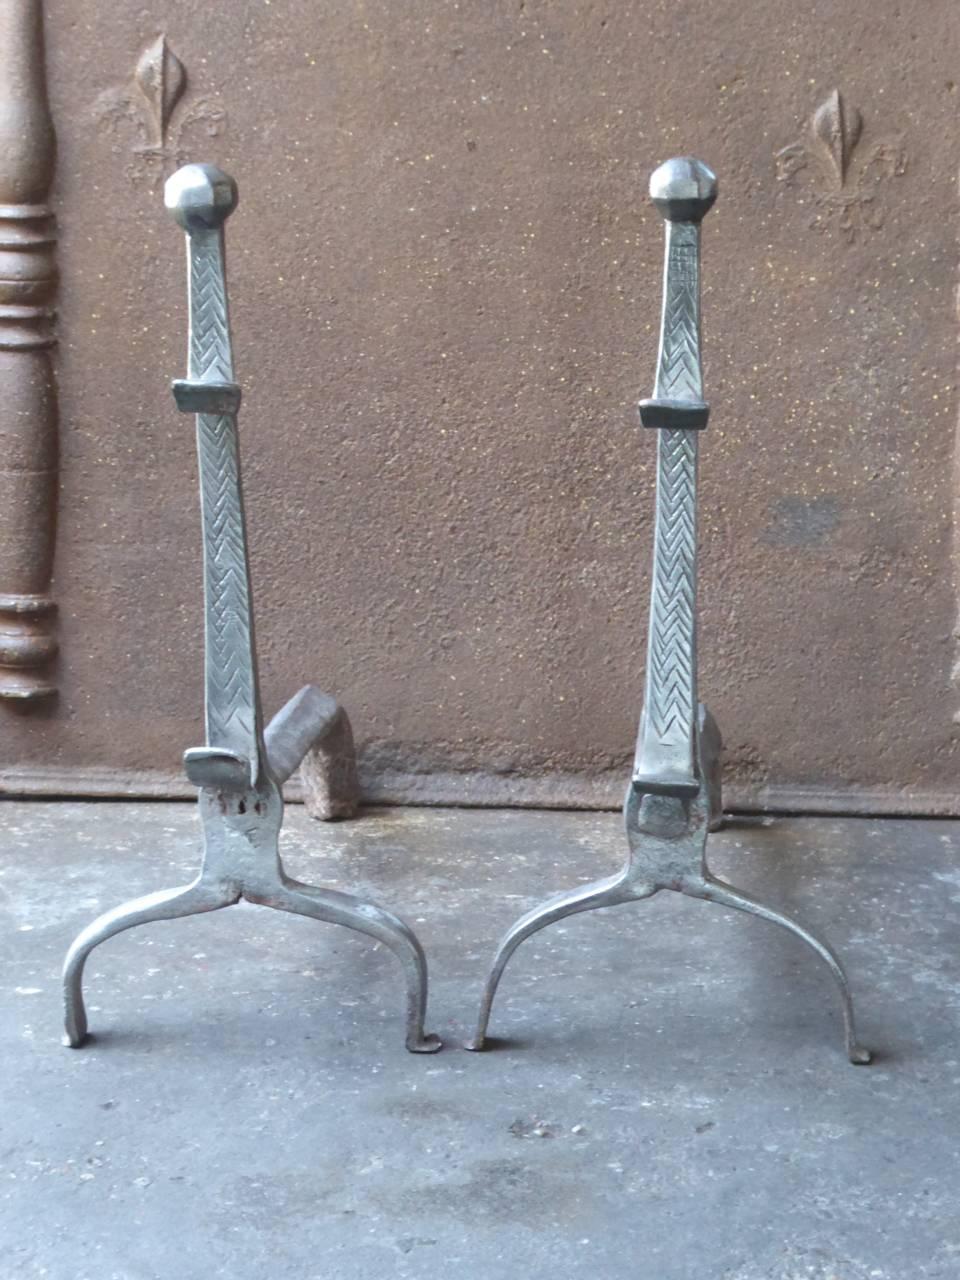 17th century French Louis XIII andirons made of wrought iron.

We have a unique and specialized collection of antique and used fireplace accessories consisting of more than 1000 listings at 1stdibs. Amongst others, we always have 300+ firebacks,